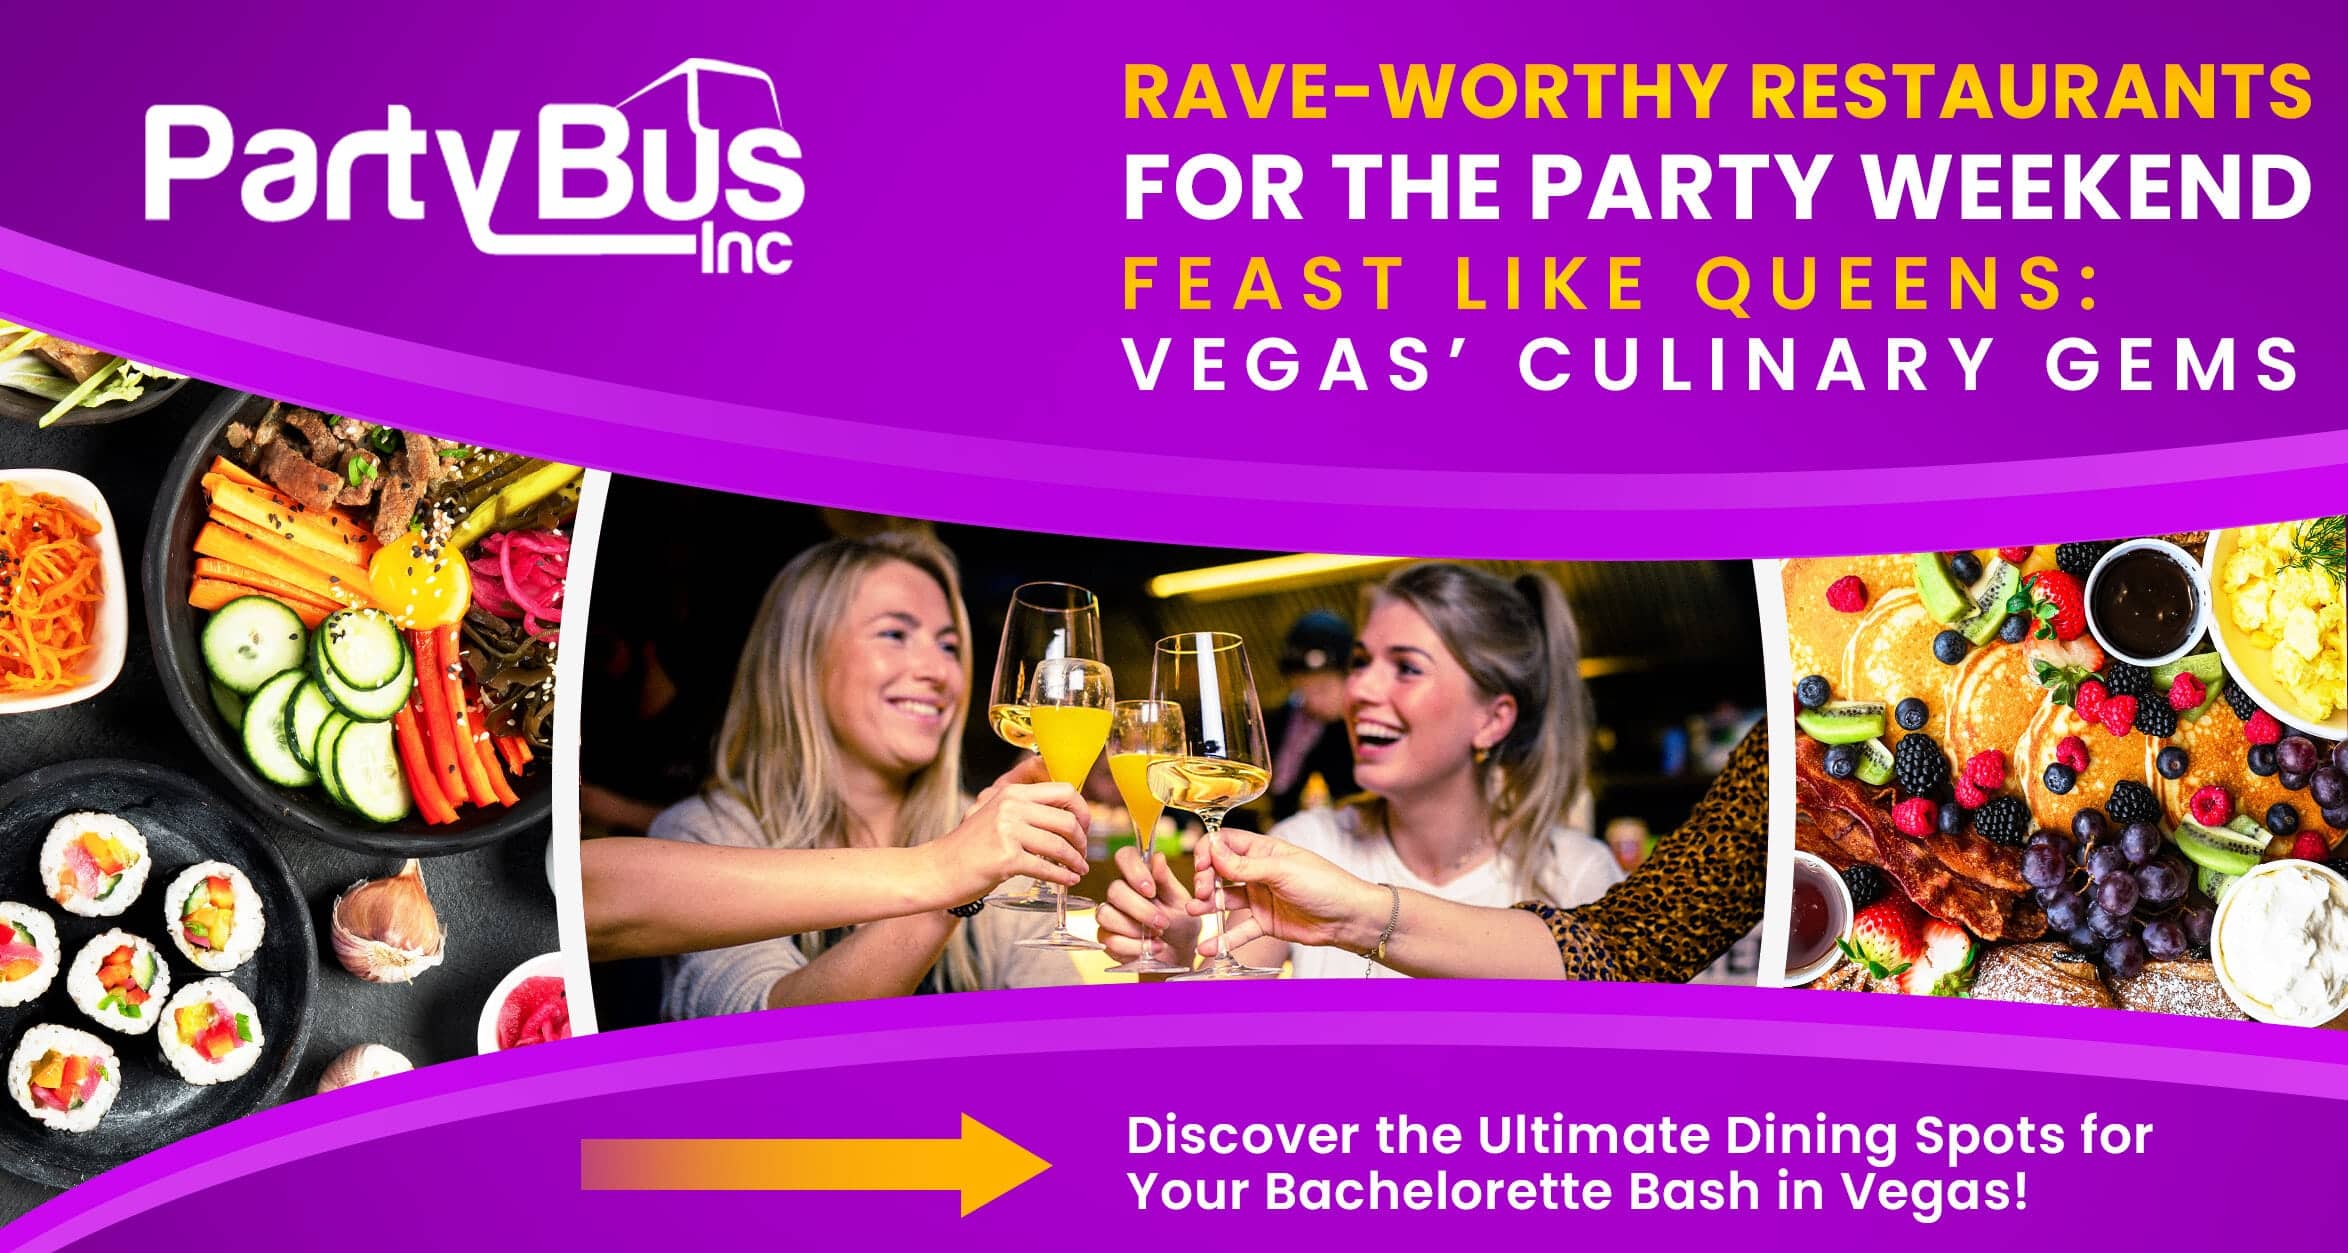 Group of women toasting with champagne, celebrating in Vegas with exquisite dining options for a bachelorette party.